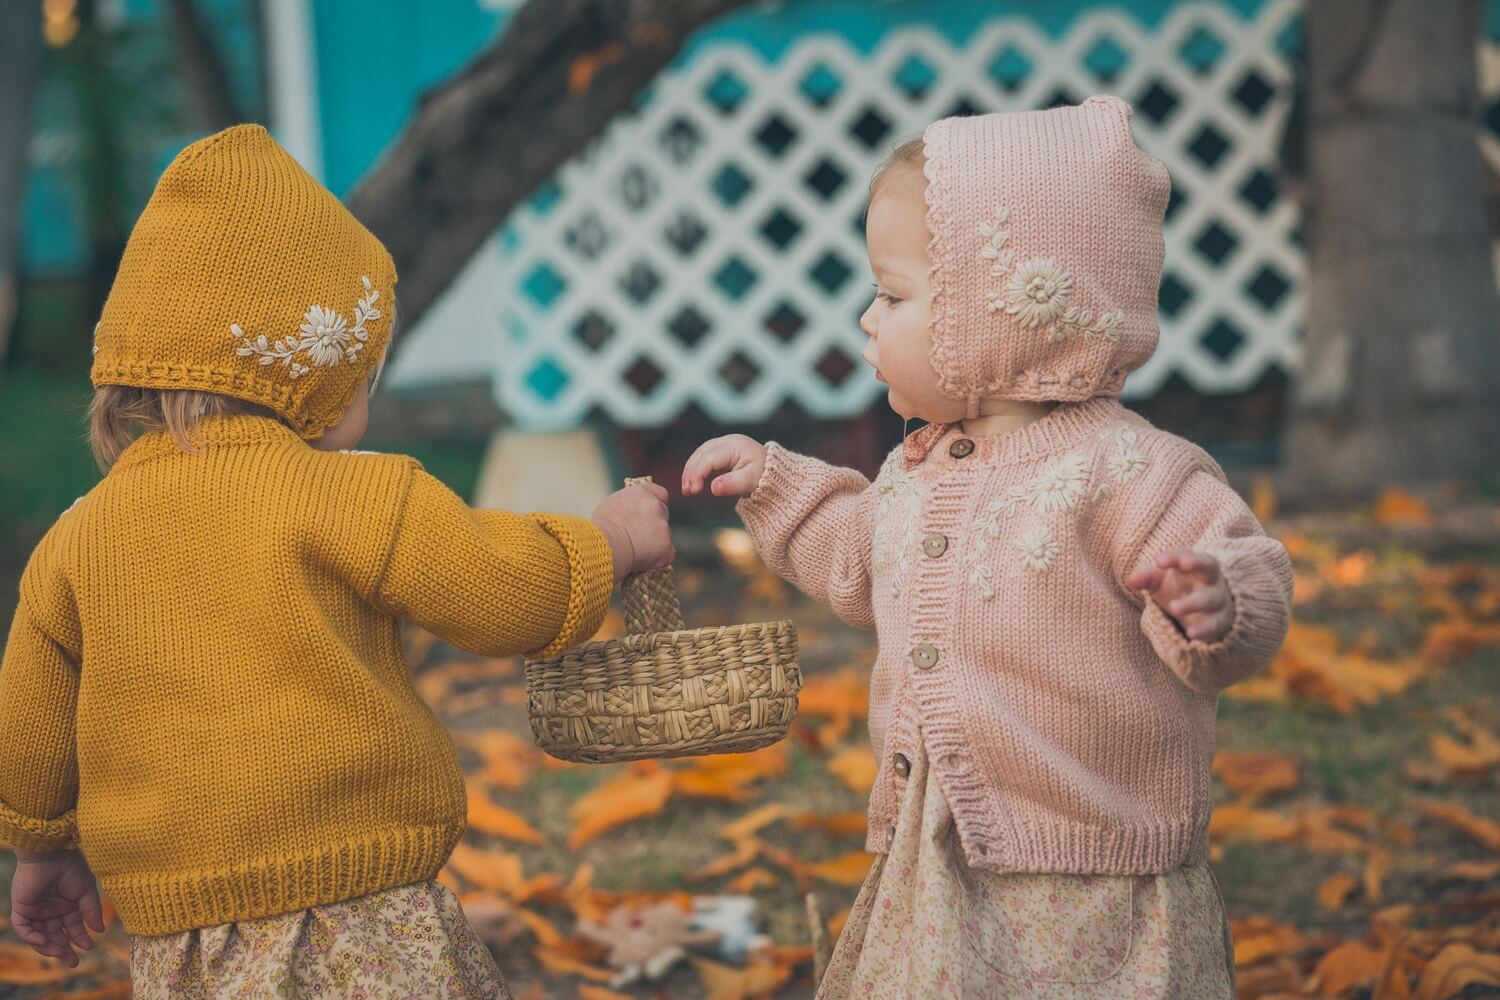 Stunning embroidered knitwear for the little ones